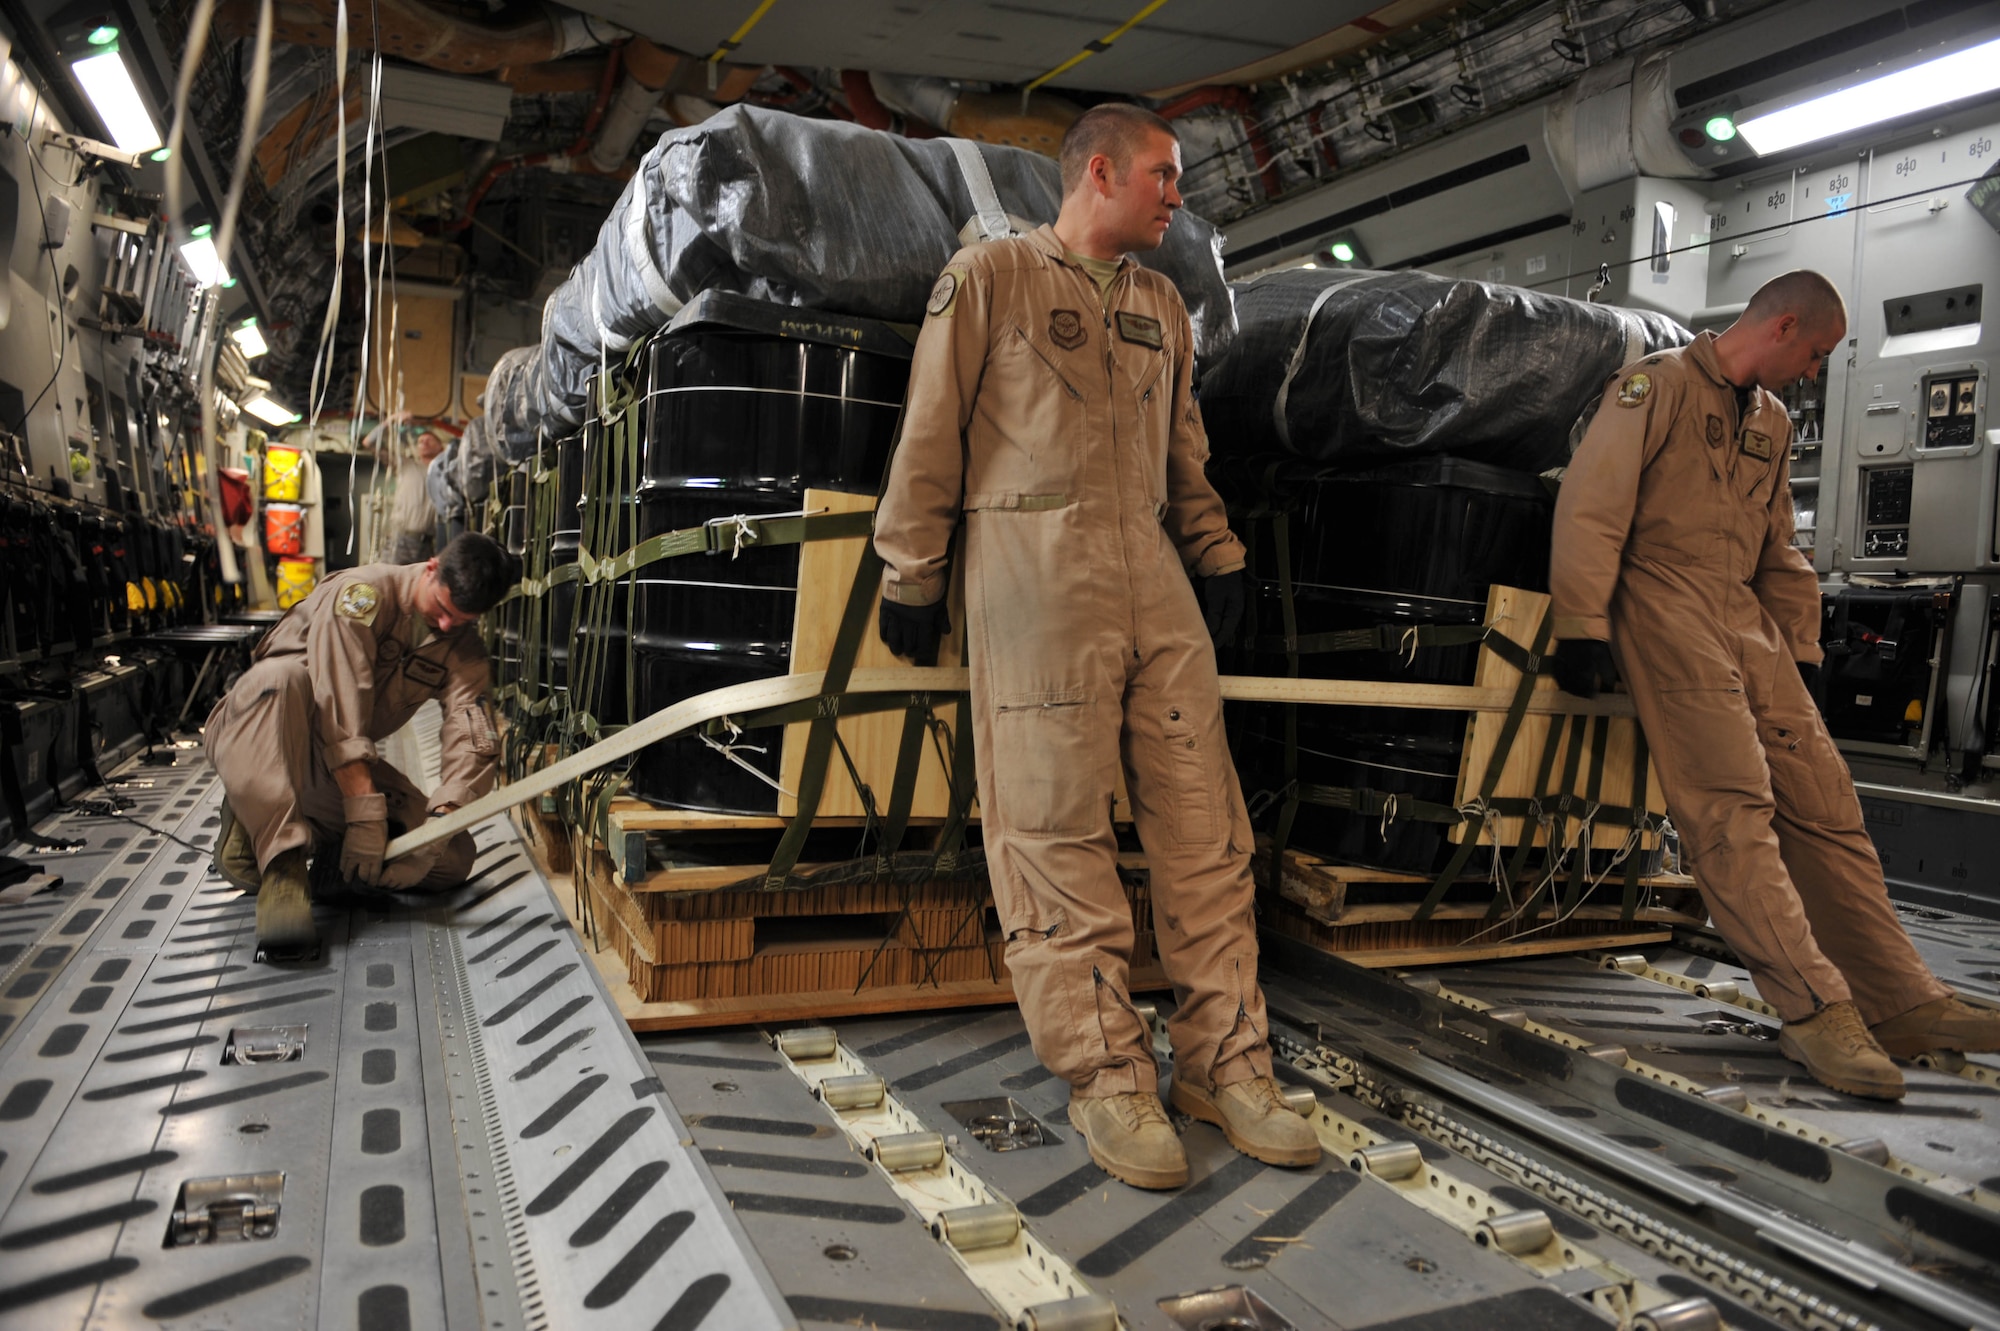 U.S. Air Force loadmaster Senior Airman Josh Faust, left, straps container delivery system bundles to the floor of a C-17 Globemaster III, while loadmaster Staff Sgt. Gabriel Reams, center, and pilot Capt. Dave Goodale hold the bundles in place at Kandahar Airfield, Afghanistan, May 27, 2010.  The crew released the bundles over Afghanistan, resupplying the Combined Joint Special Operations Task Force with food, water and fuel.  Captain Goodale, Sergeant Reams and Airman Faust are assigned to the 816th Expeditionary Airlift Squadron.  (U.S. Air Force photo/Staff Sgt. Quinton Russ/released)